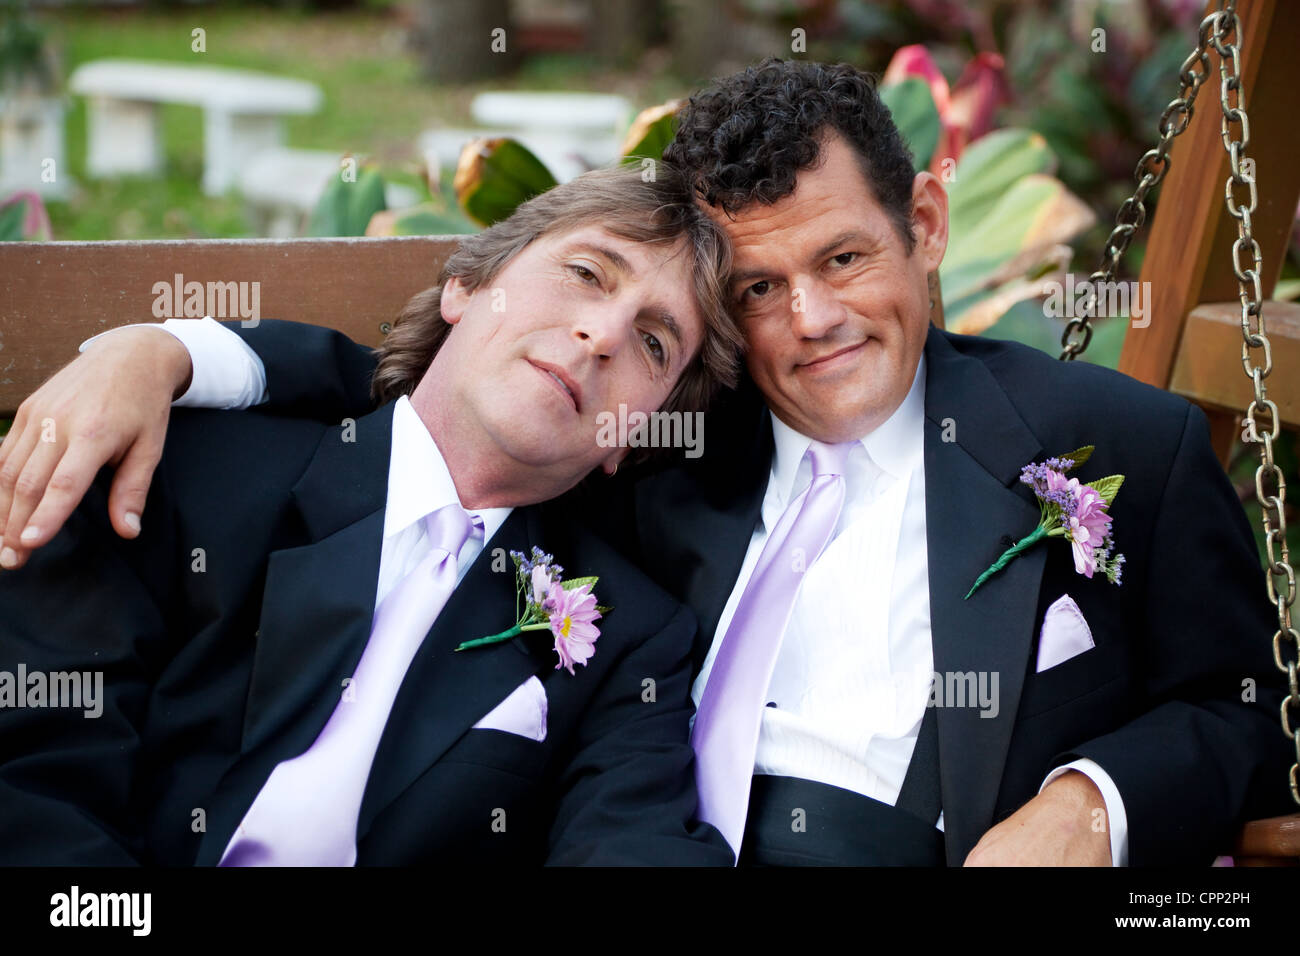 Portrait of very handsome gay male couple on their wedding day.  Stock Photo